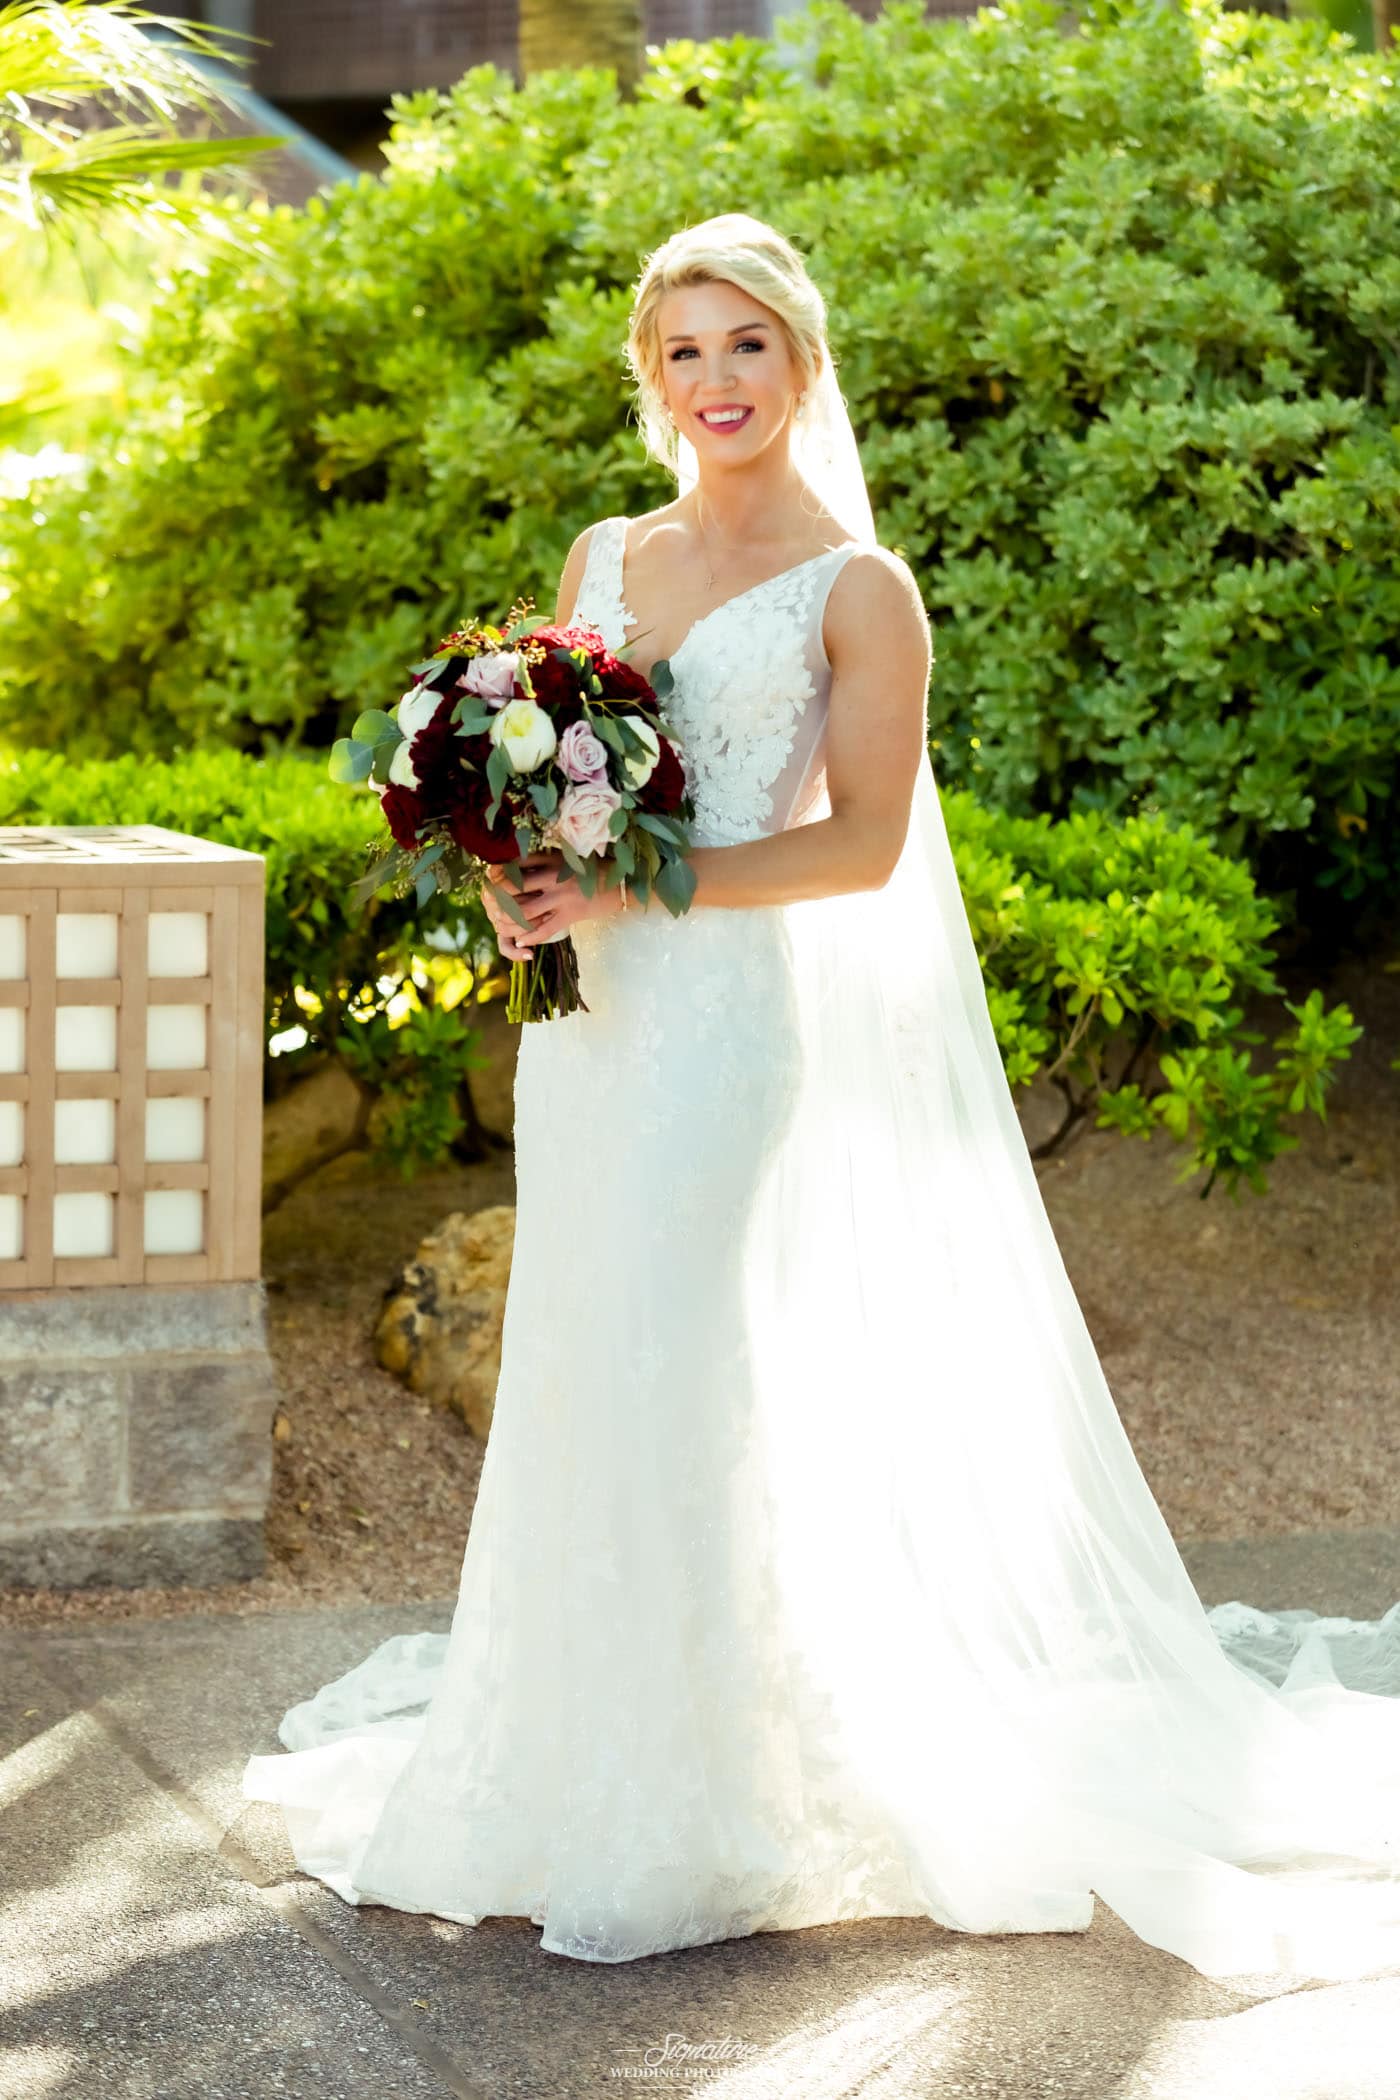 Bride holding bouquet smiling at camera outside